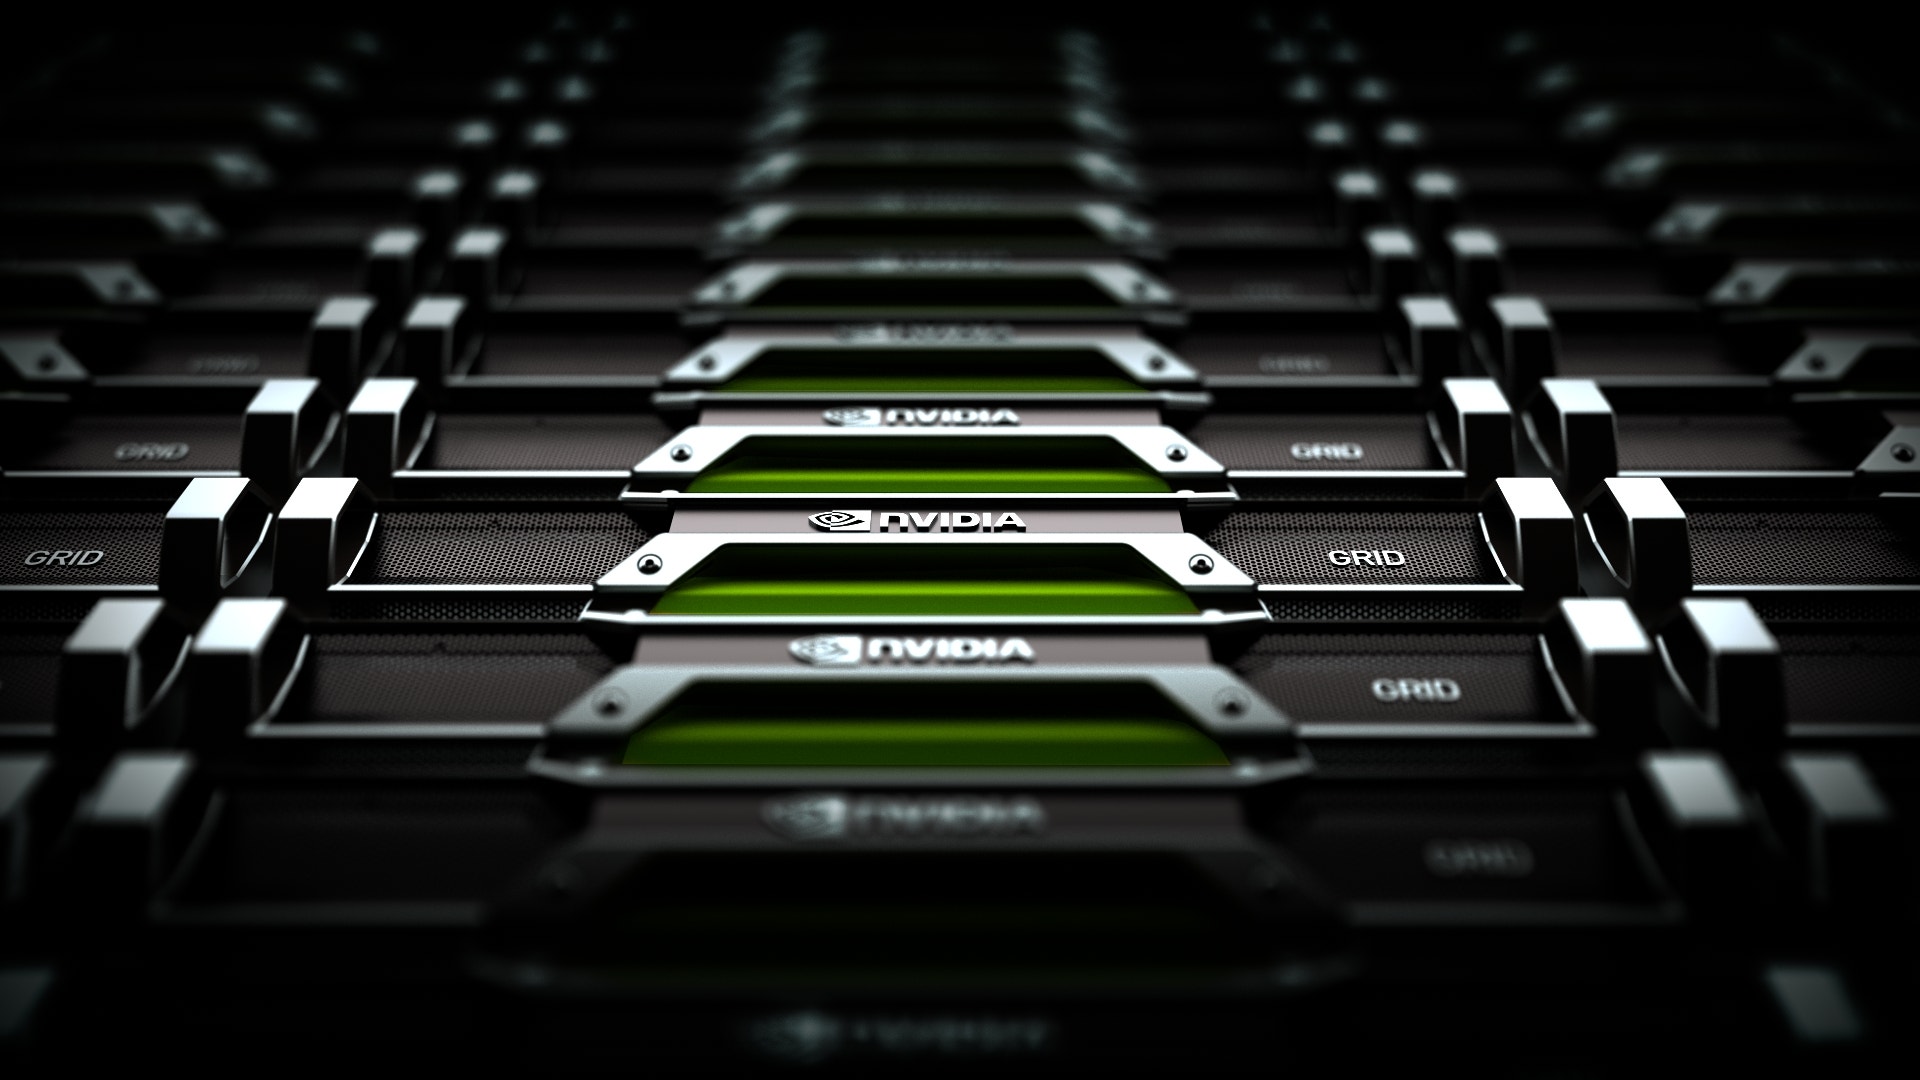 What's Going On With Nvidia Stock Thursday?